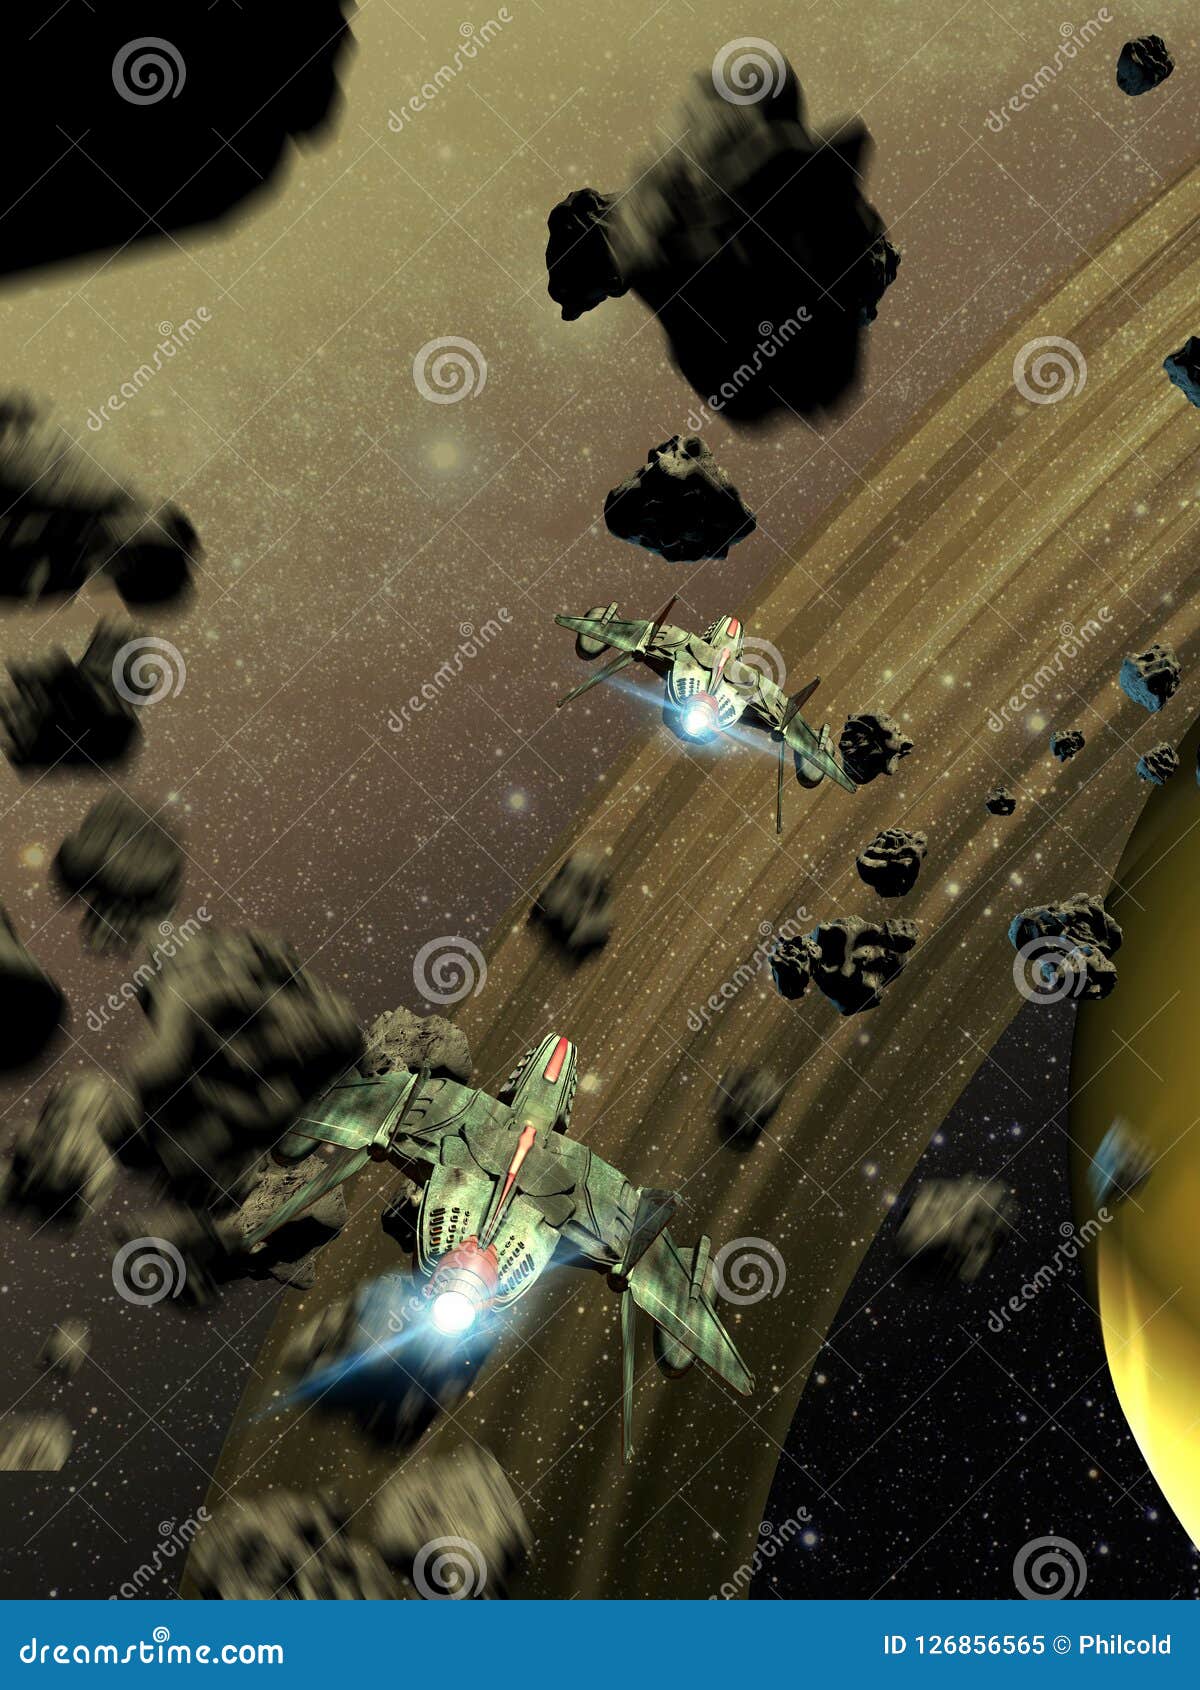 space fighters crossing an asteroids belt